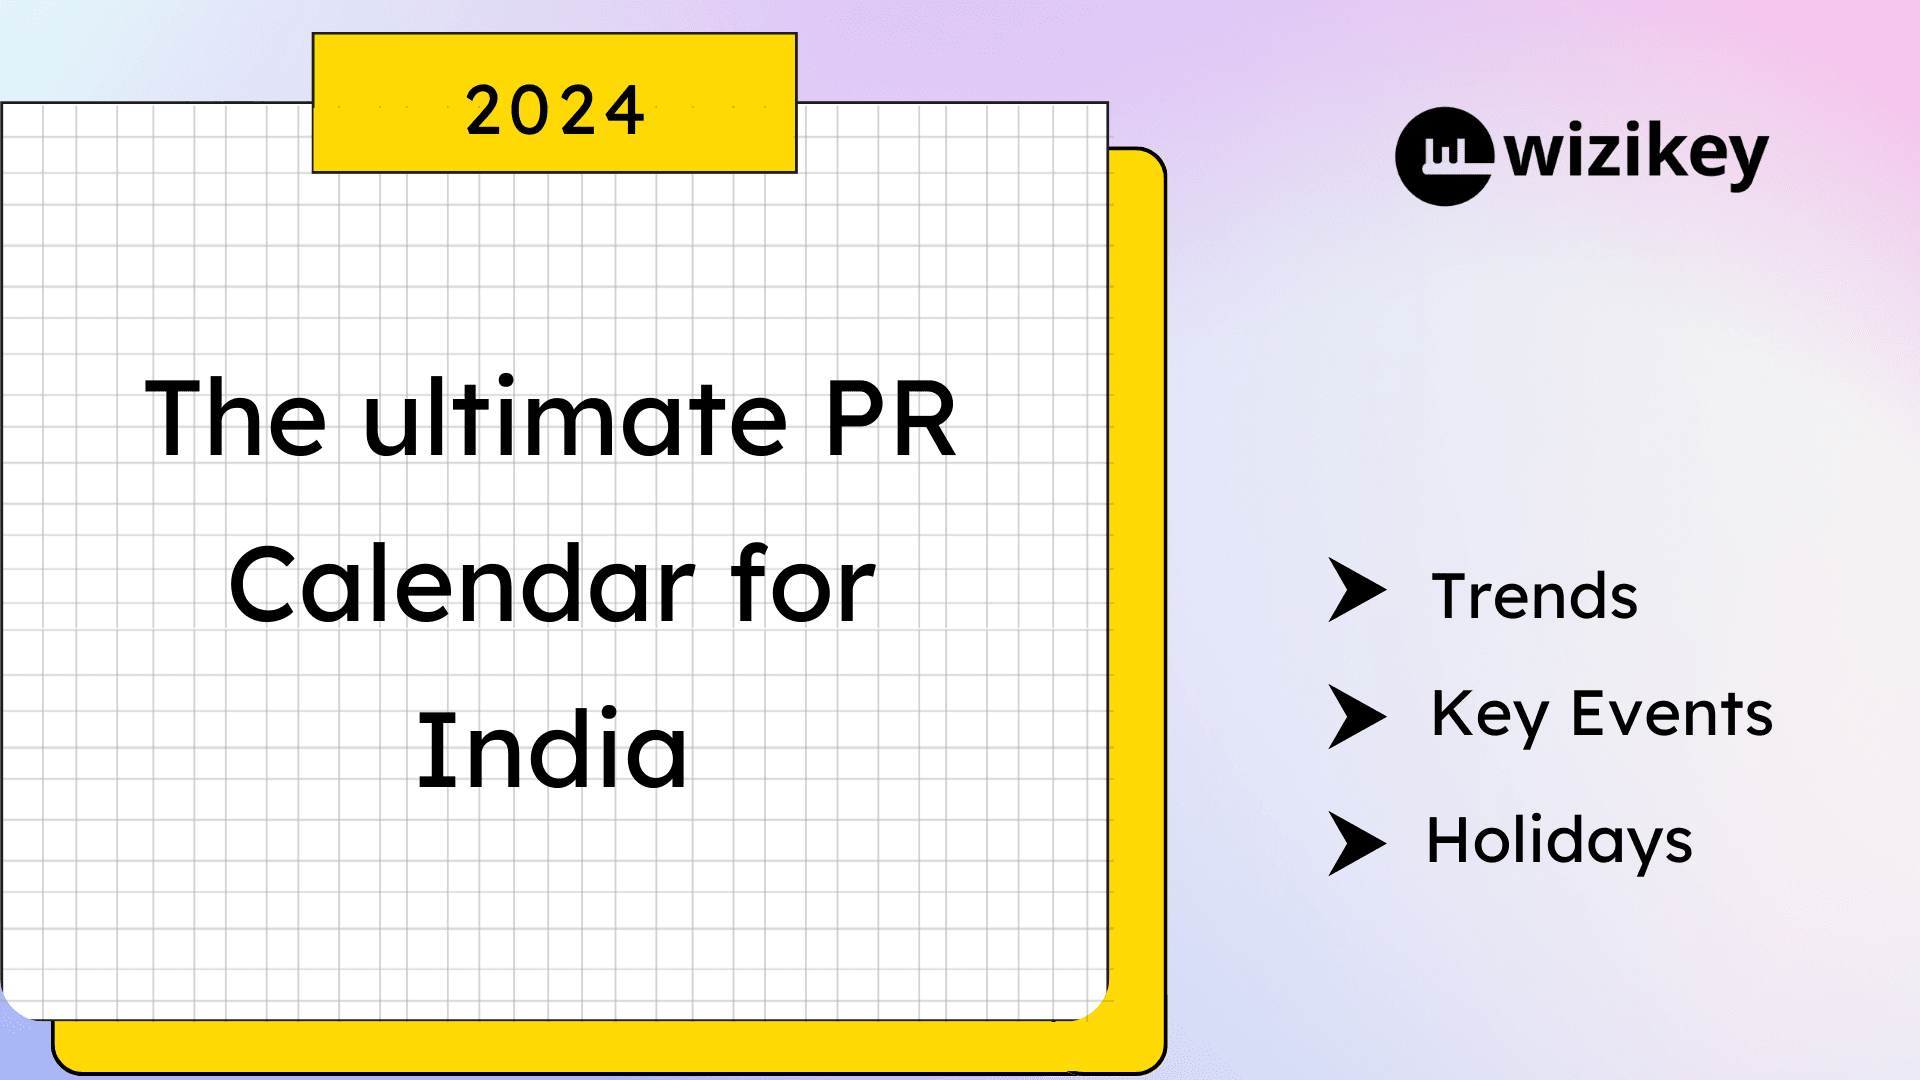 The Ultimate PR Calendar for India for 2024